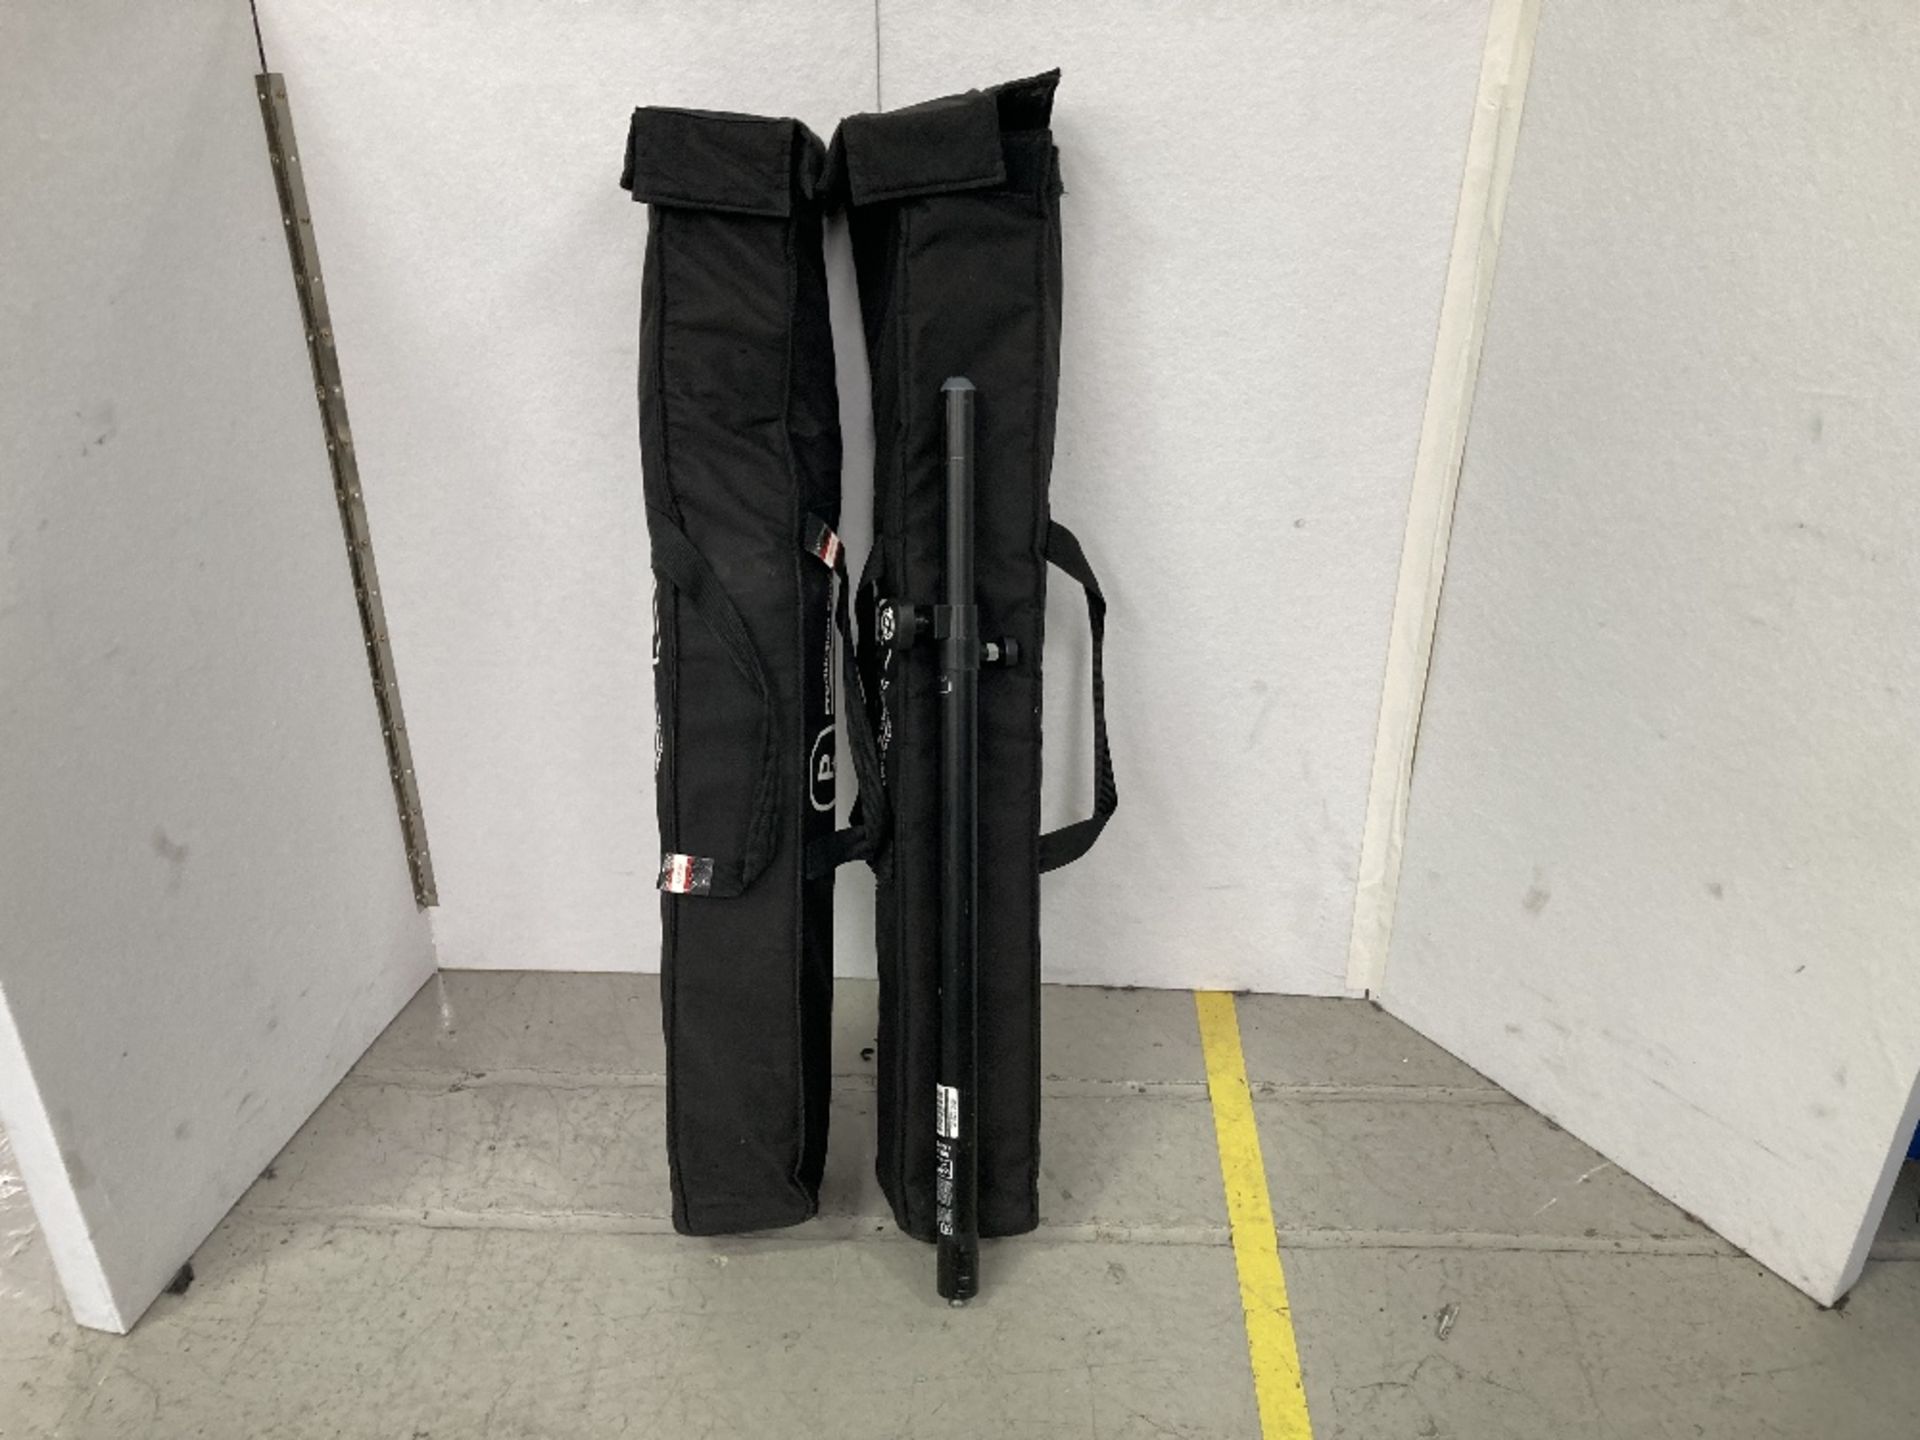 (8) Black Speaker Stands with Padded Bags